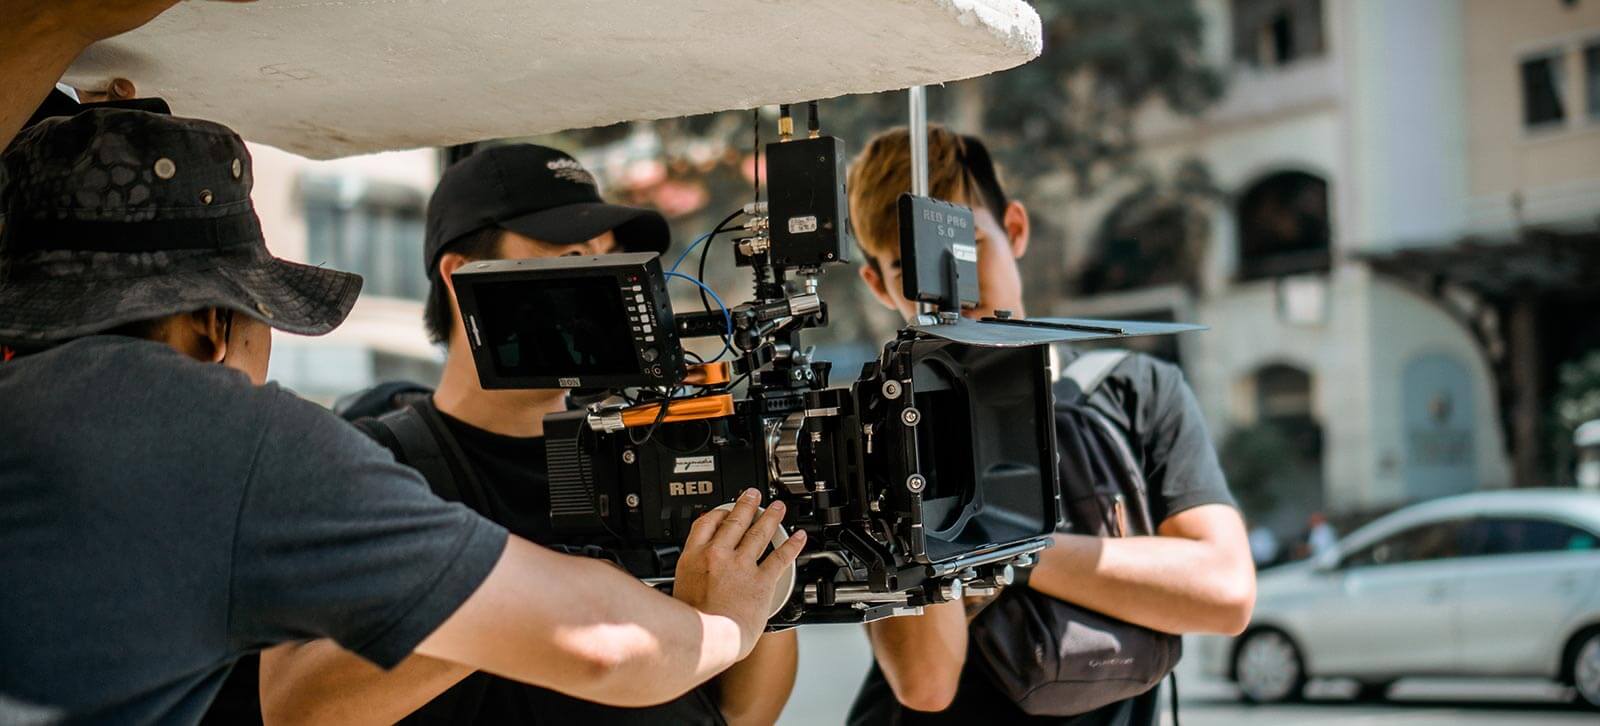 Sydney’s Top Video Production Companies: Which One is Right for You?